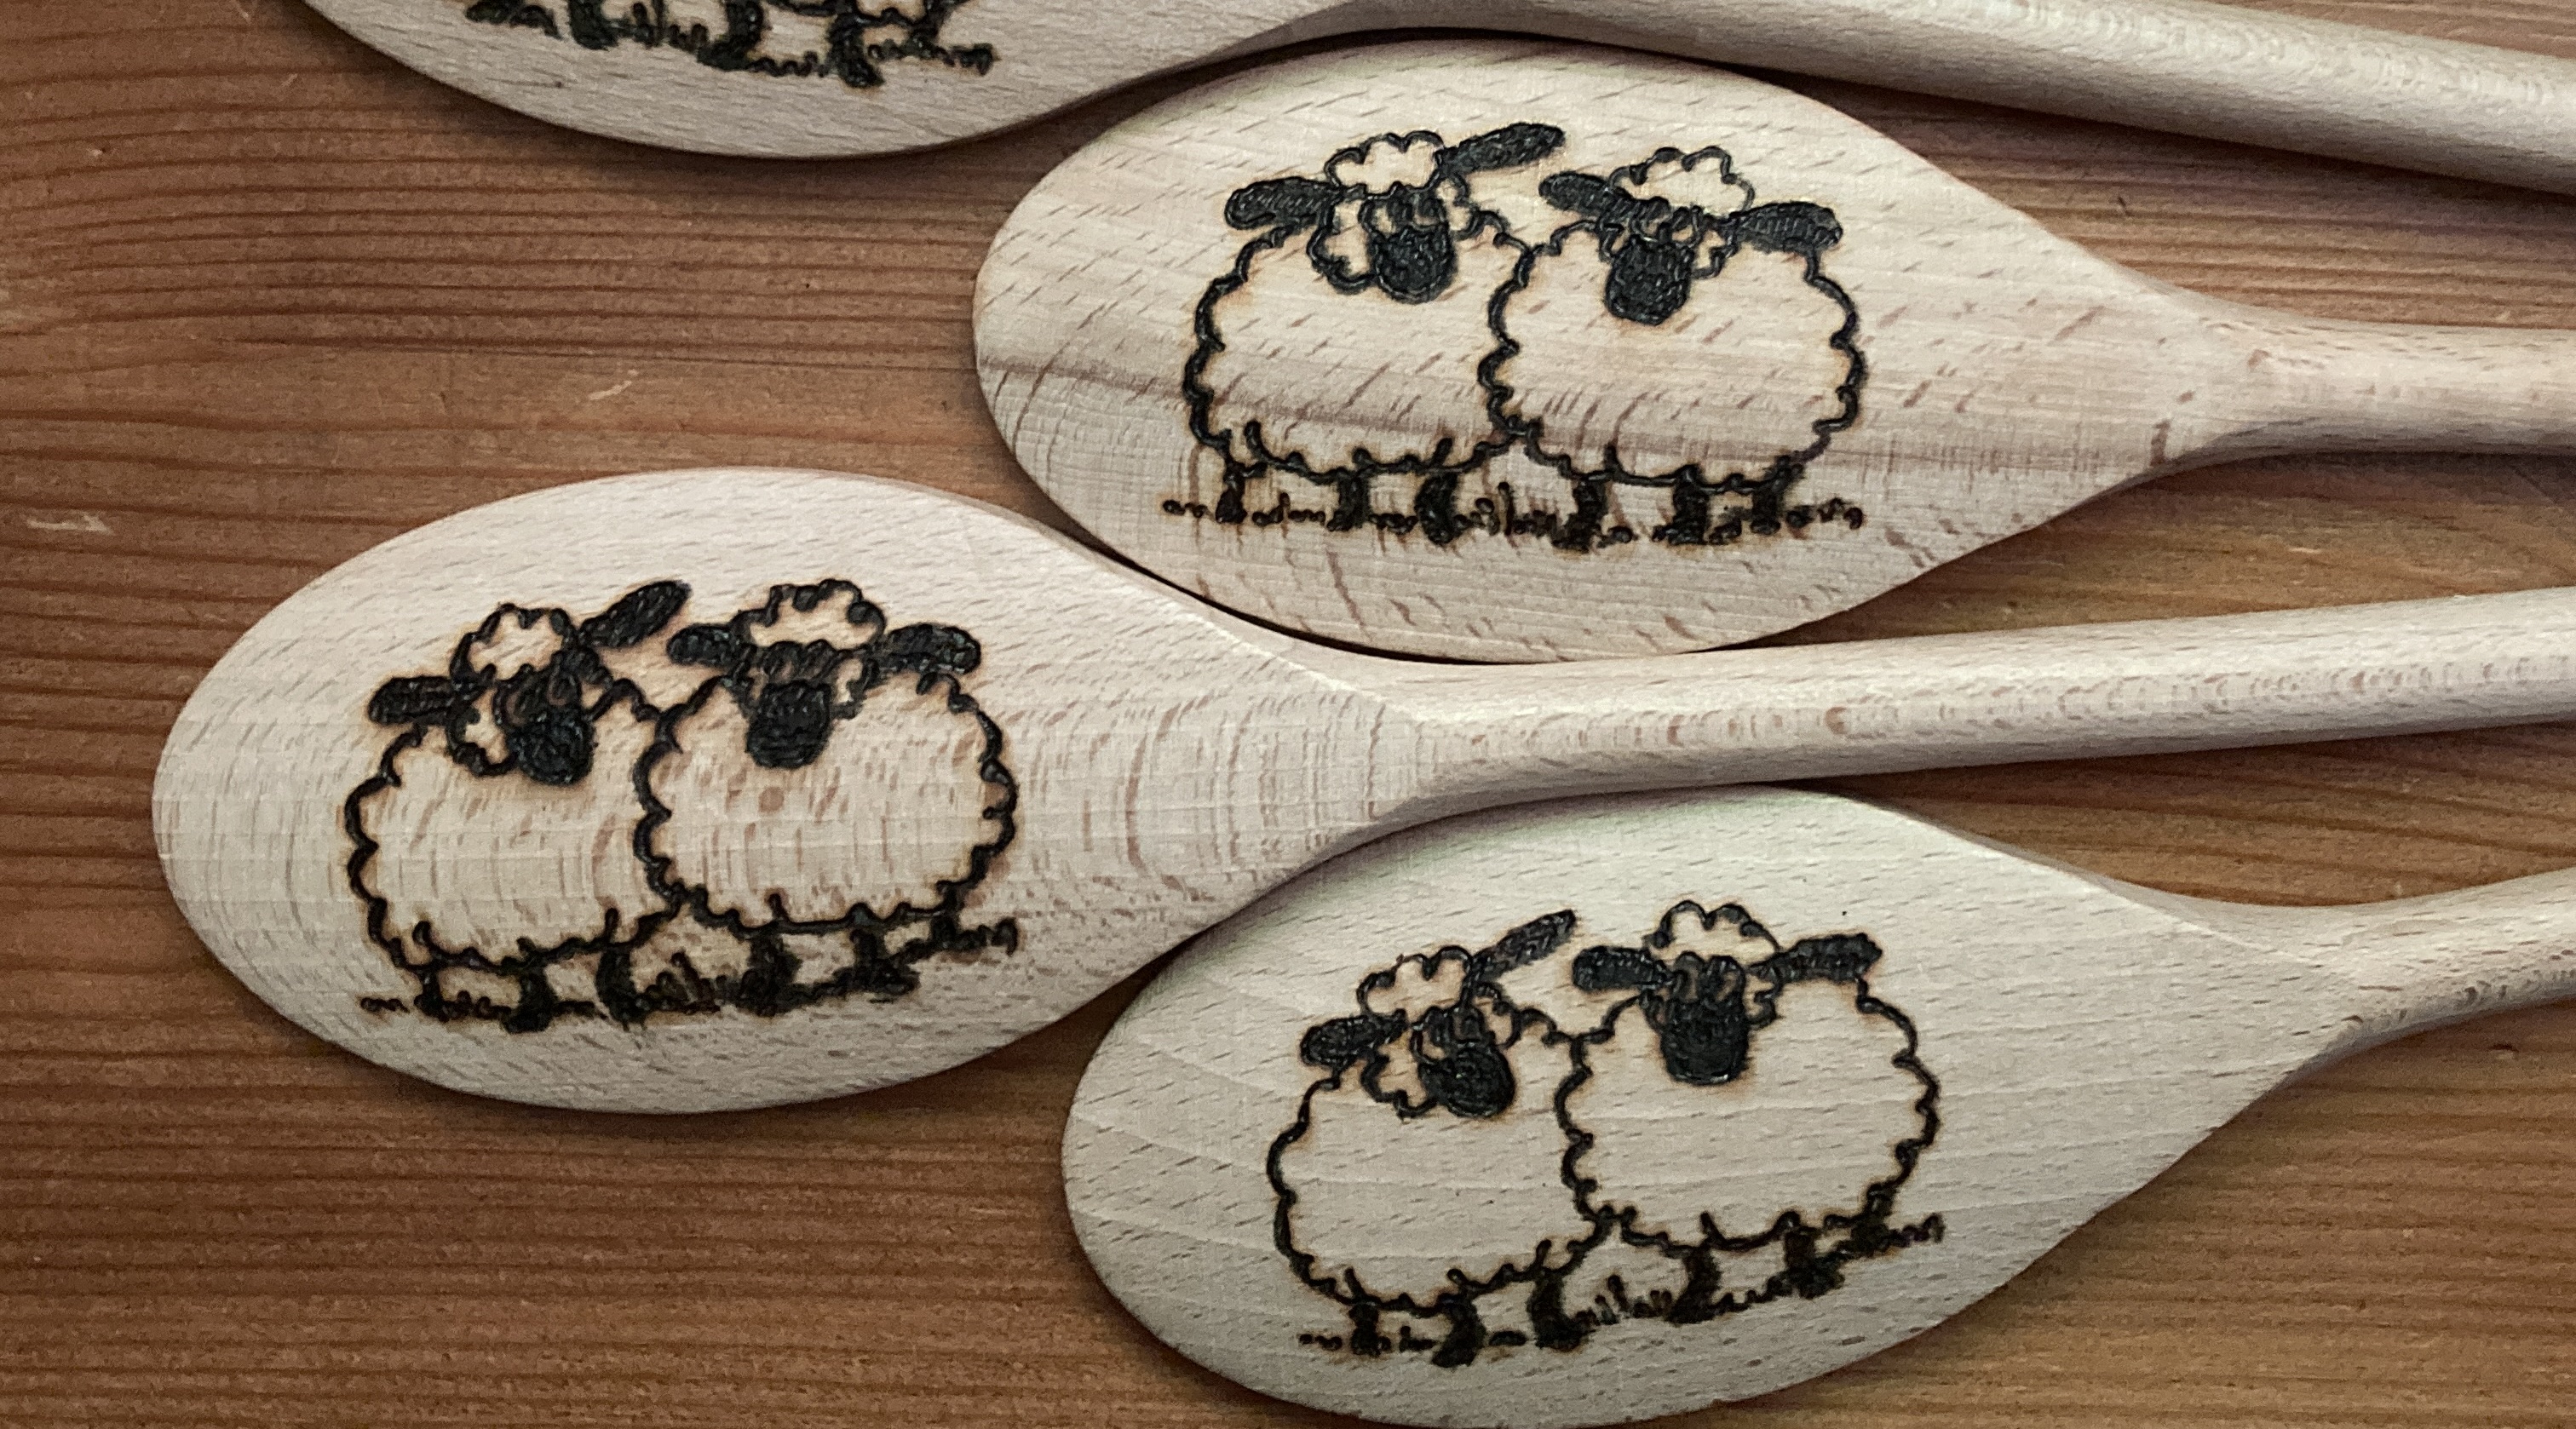 Three wooden spoons lie face down on a darker wooden desk. The back of each is decorated with a pyrography design of two comical sheep. A fourth spoon is just visible at the top of the image.